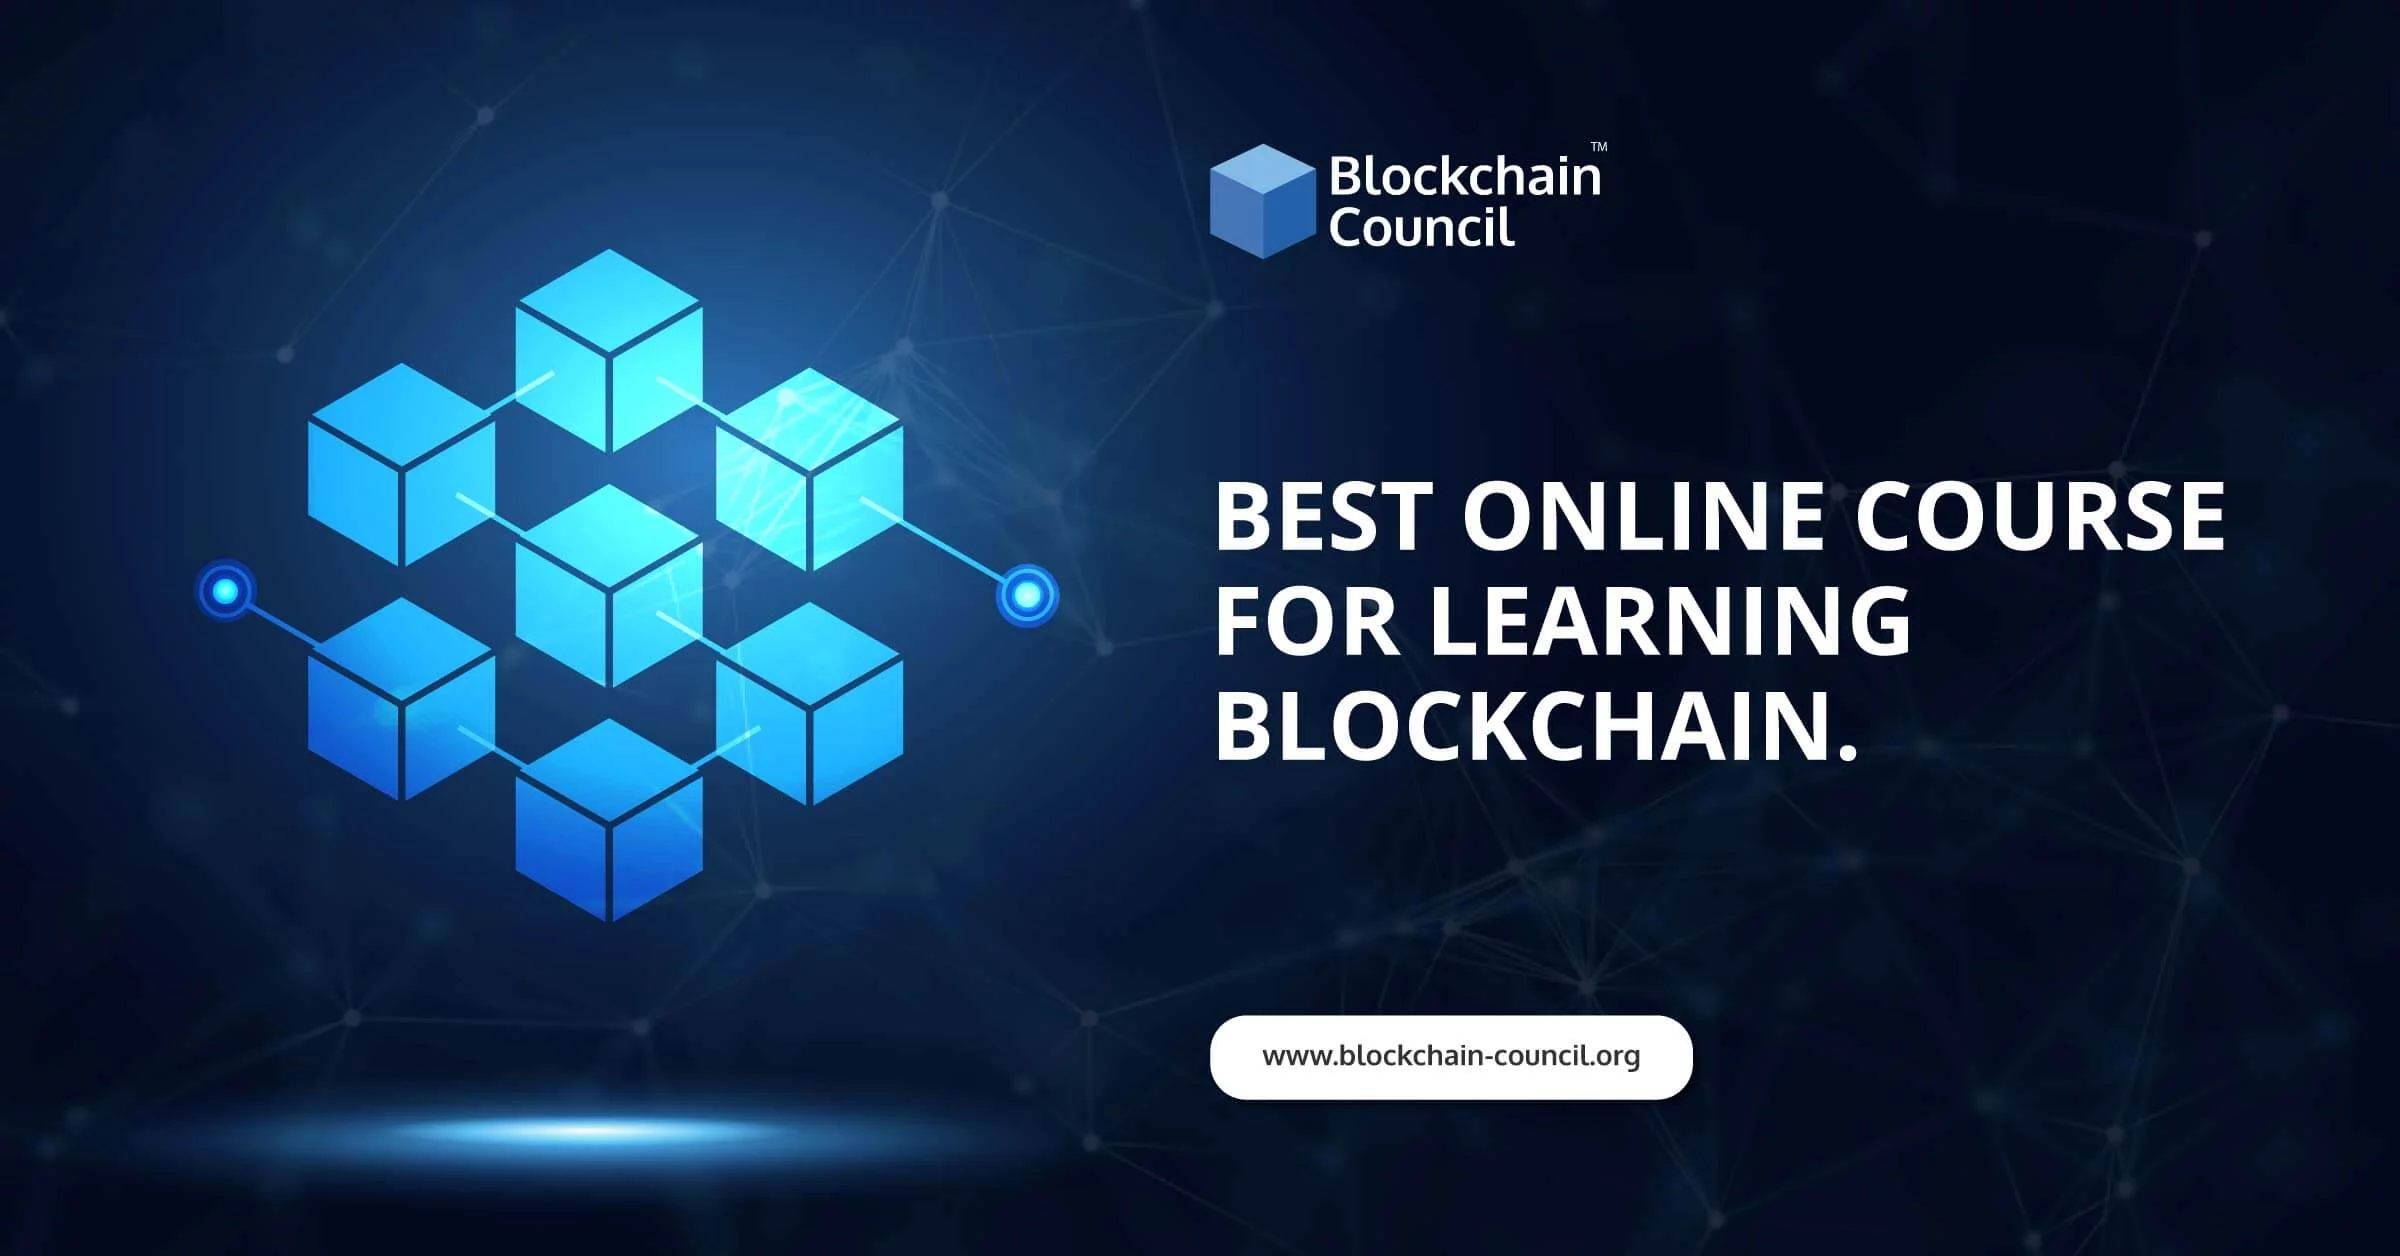 Best Online Course For Learning Blockchain